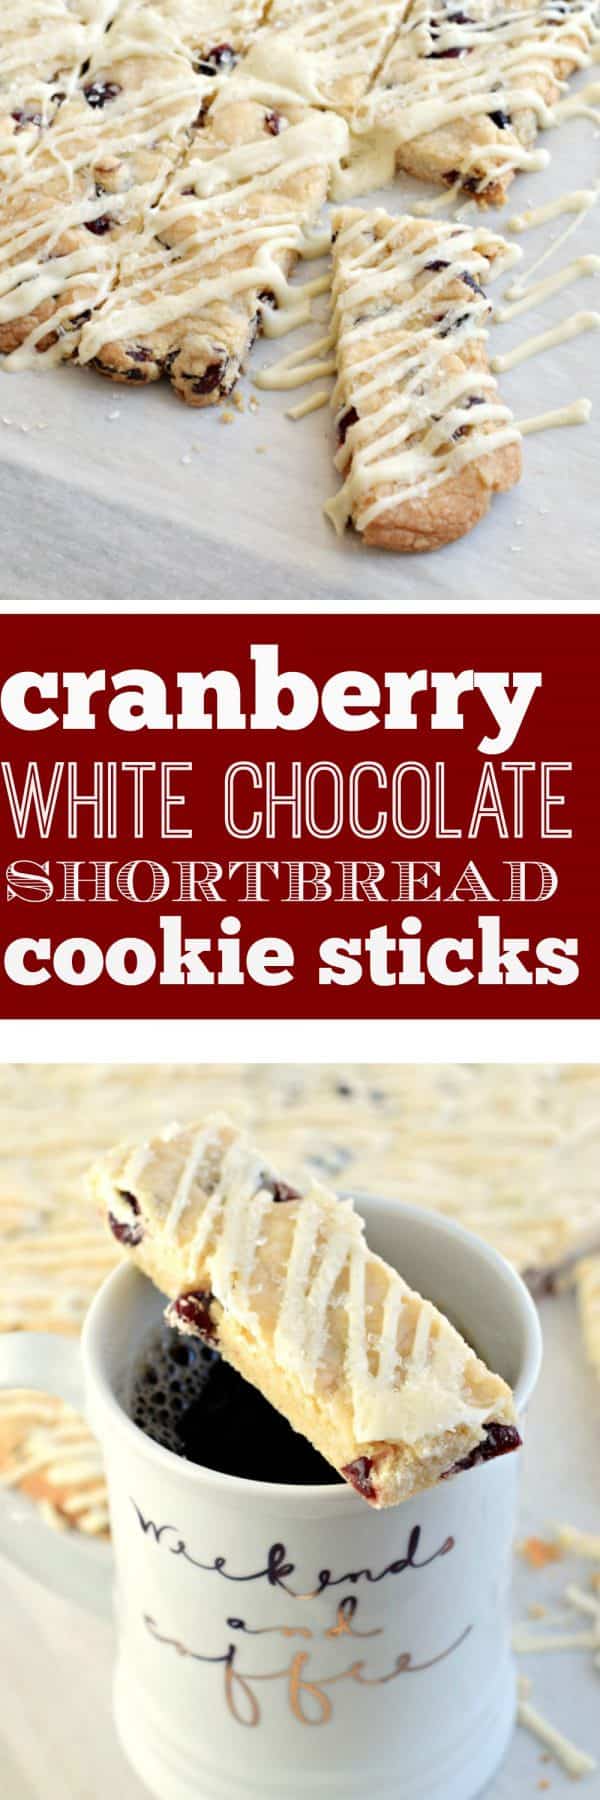 Get festive with these Cranberry White Chocolate Shortbread Cookie Sticks. Melt in your mouth delicious! You may need to double the recipe, these go fast!